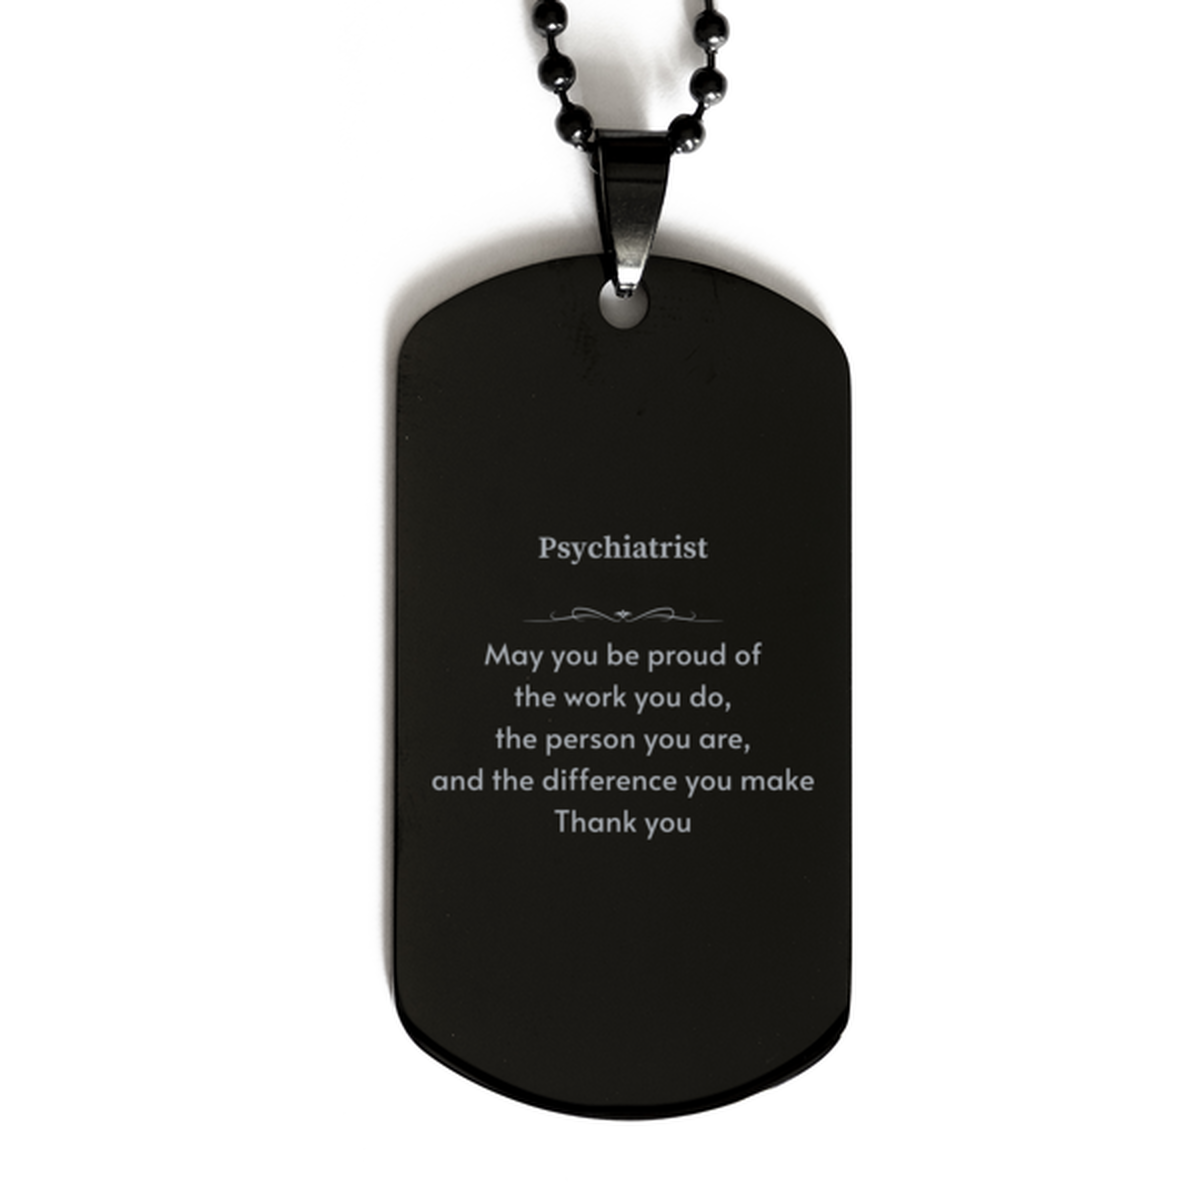 Heartwarming Black Dog Tag Retirement Coworkers Gifts for Psychiatrist, Psychiatrist May You be proud of the work you do, the person you are Gifts for Boss Men Women Friends